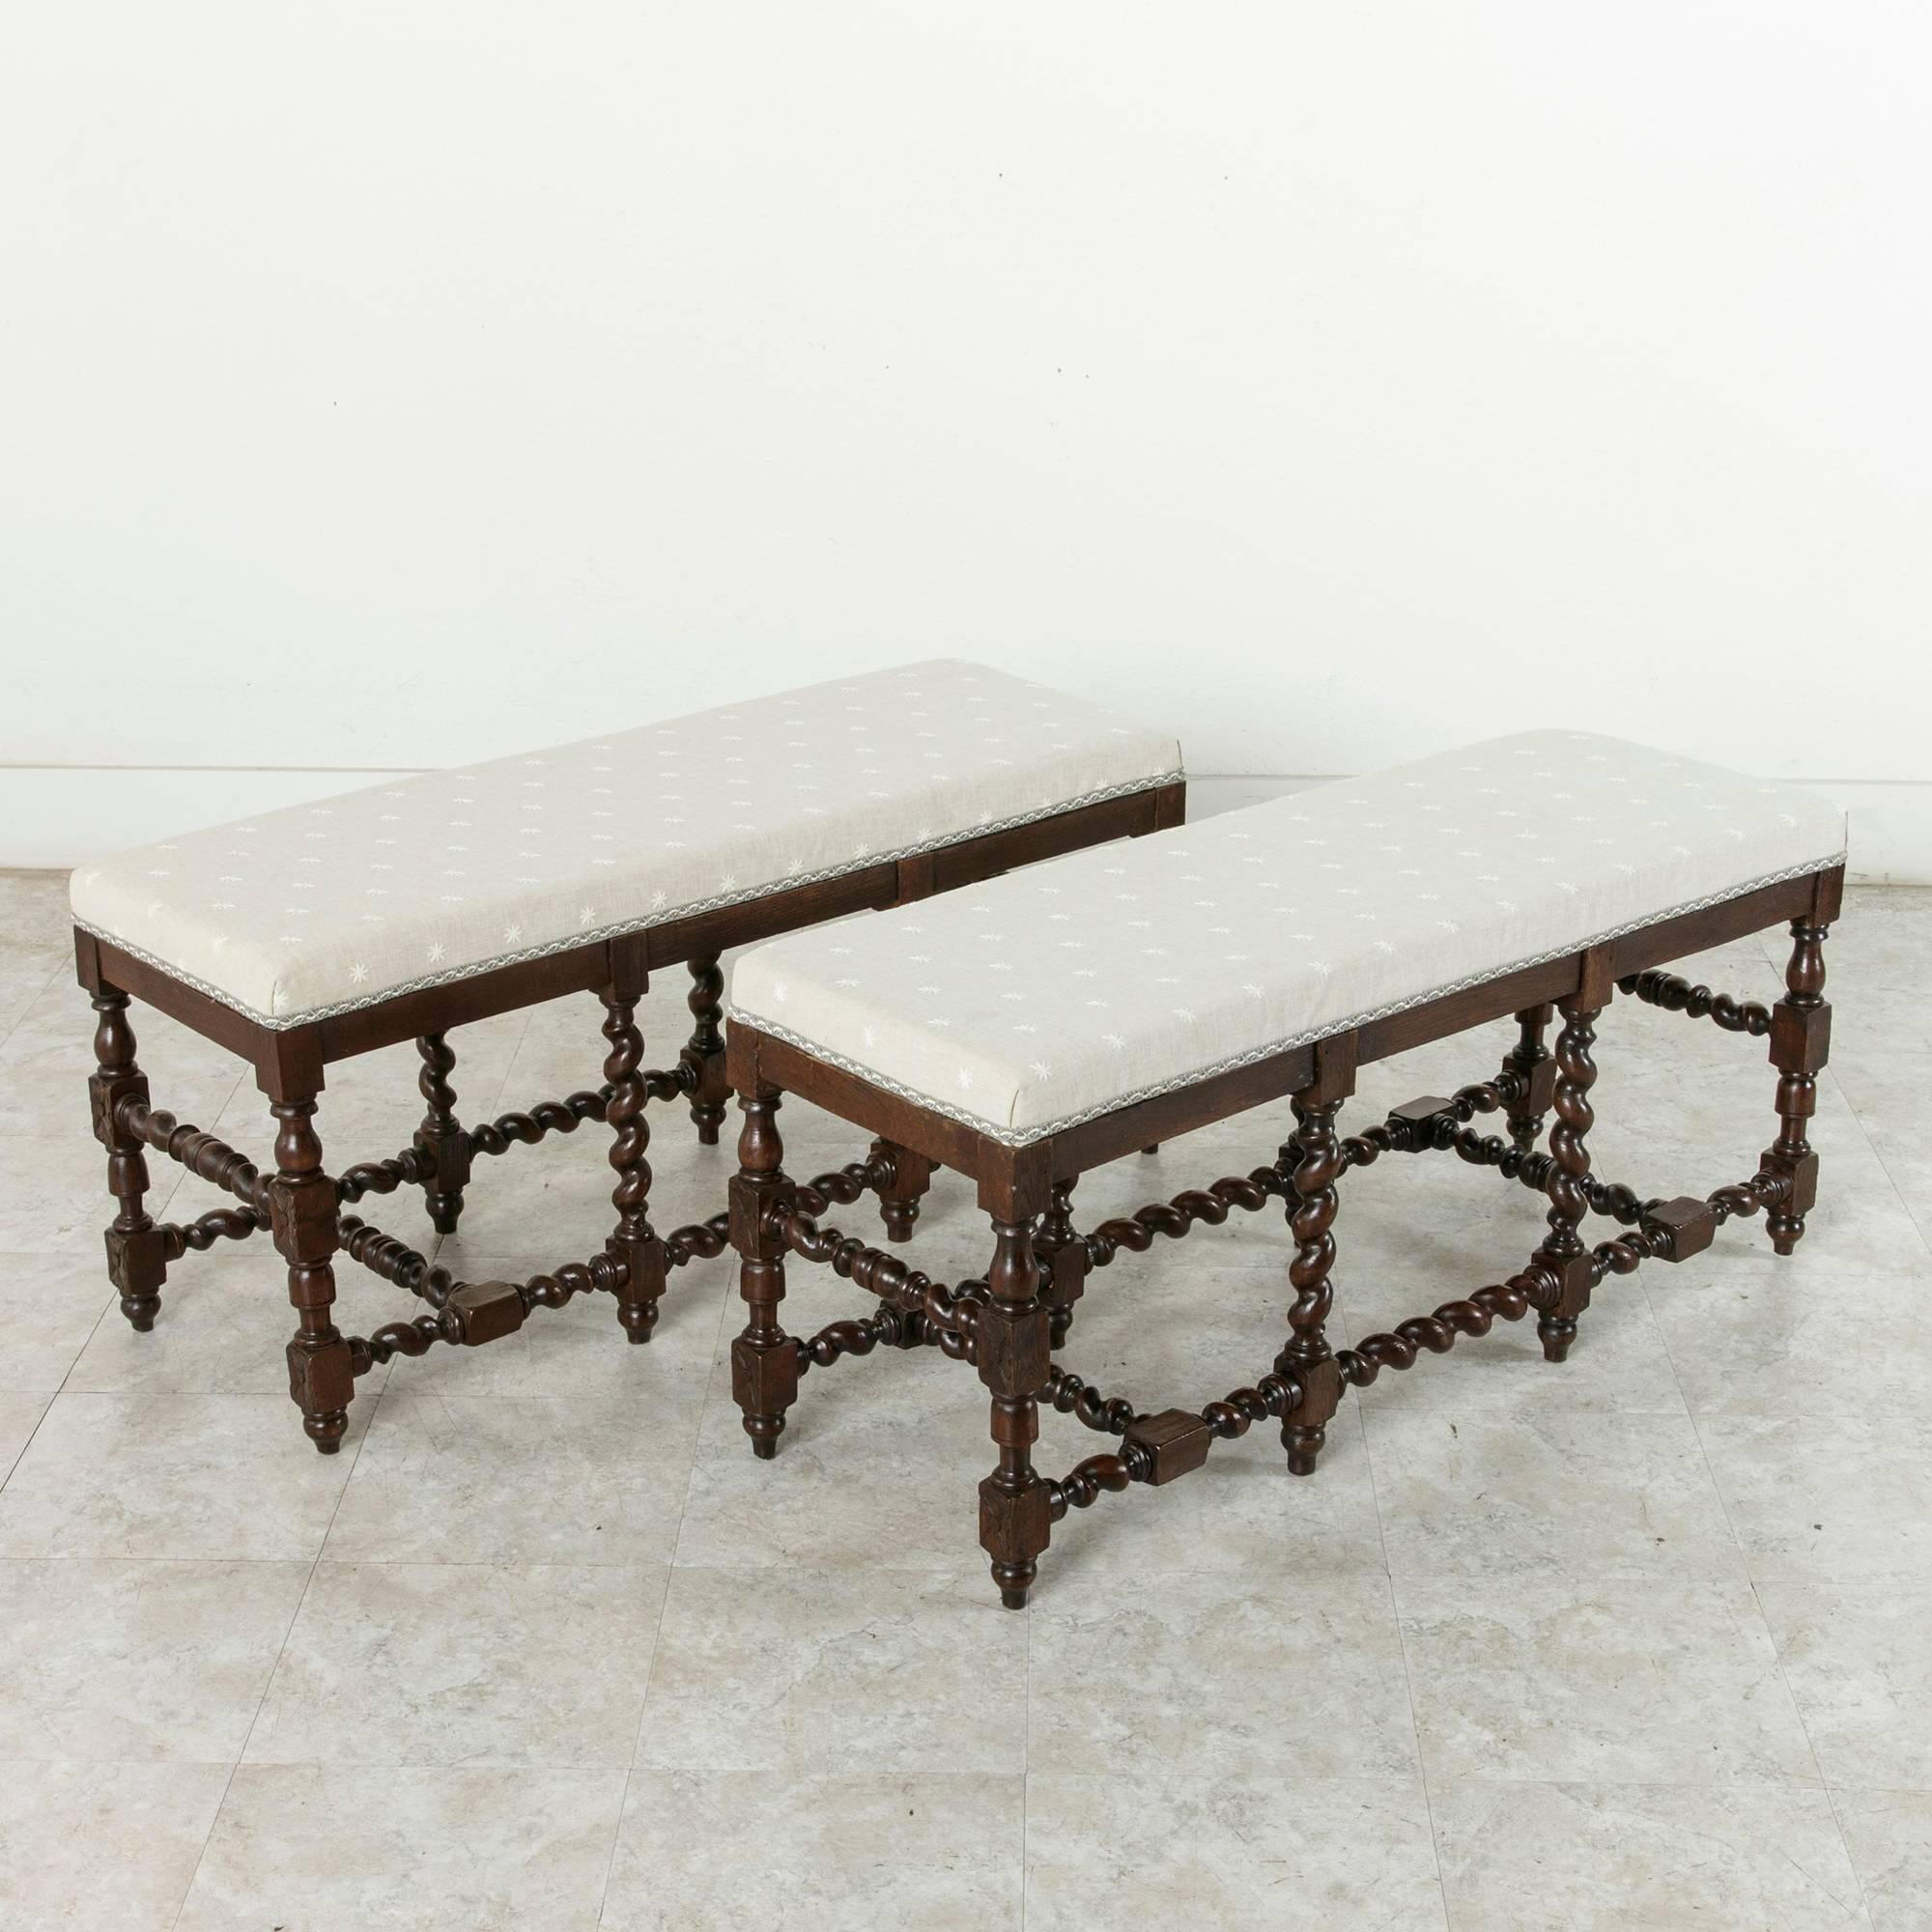 This pair of hand-carved oak banquettes or benches feature barley twist legs and stretchers. Each bench has eight legs joined by multiple barley twist stretchers for exceptional stability. Recently re-upholstered. Priced separately, circa 1900.